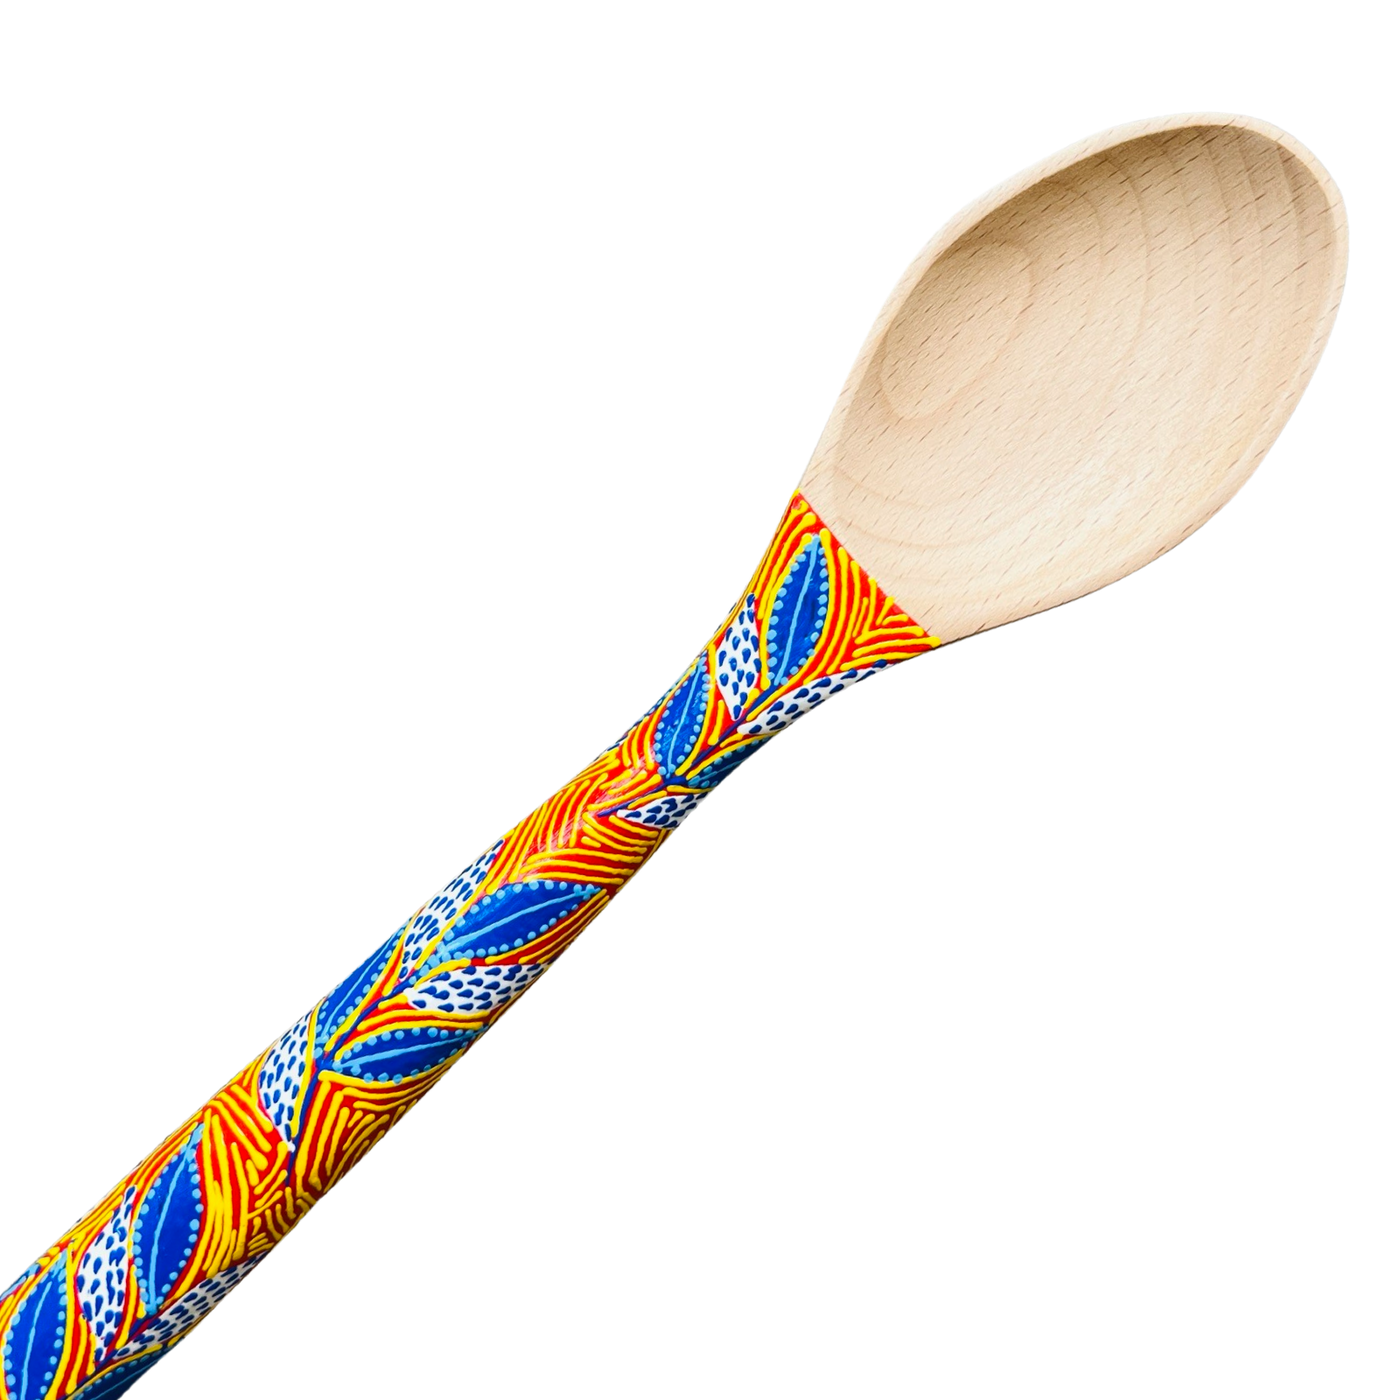 close up view of a wooden spoon with a orange painted handle that features a yellow and blue design